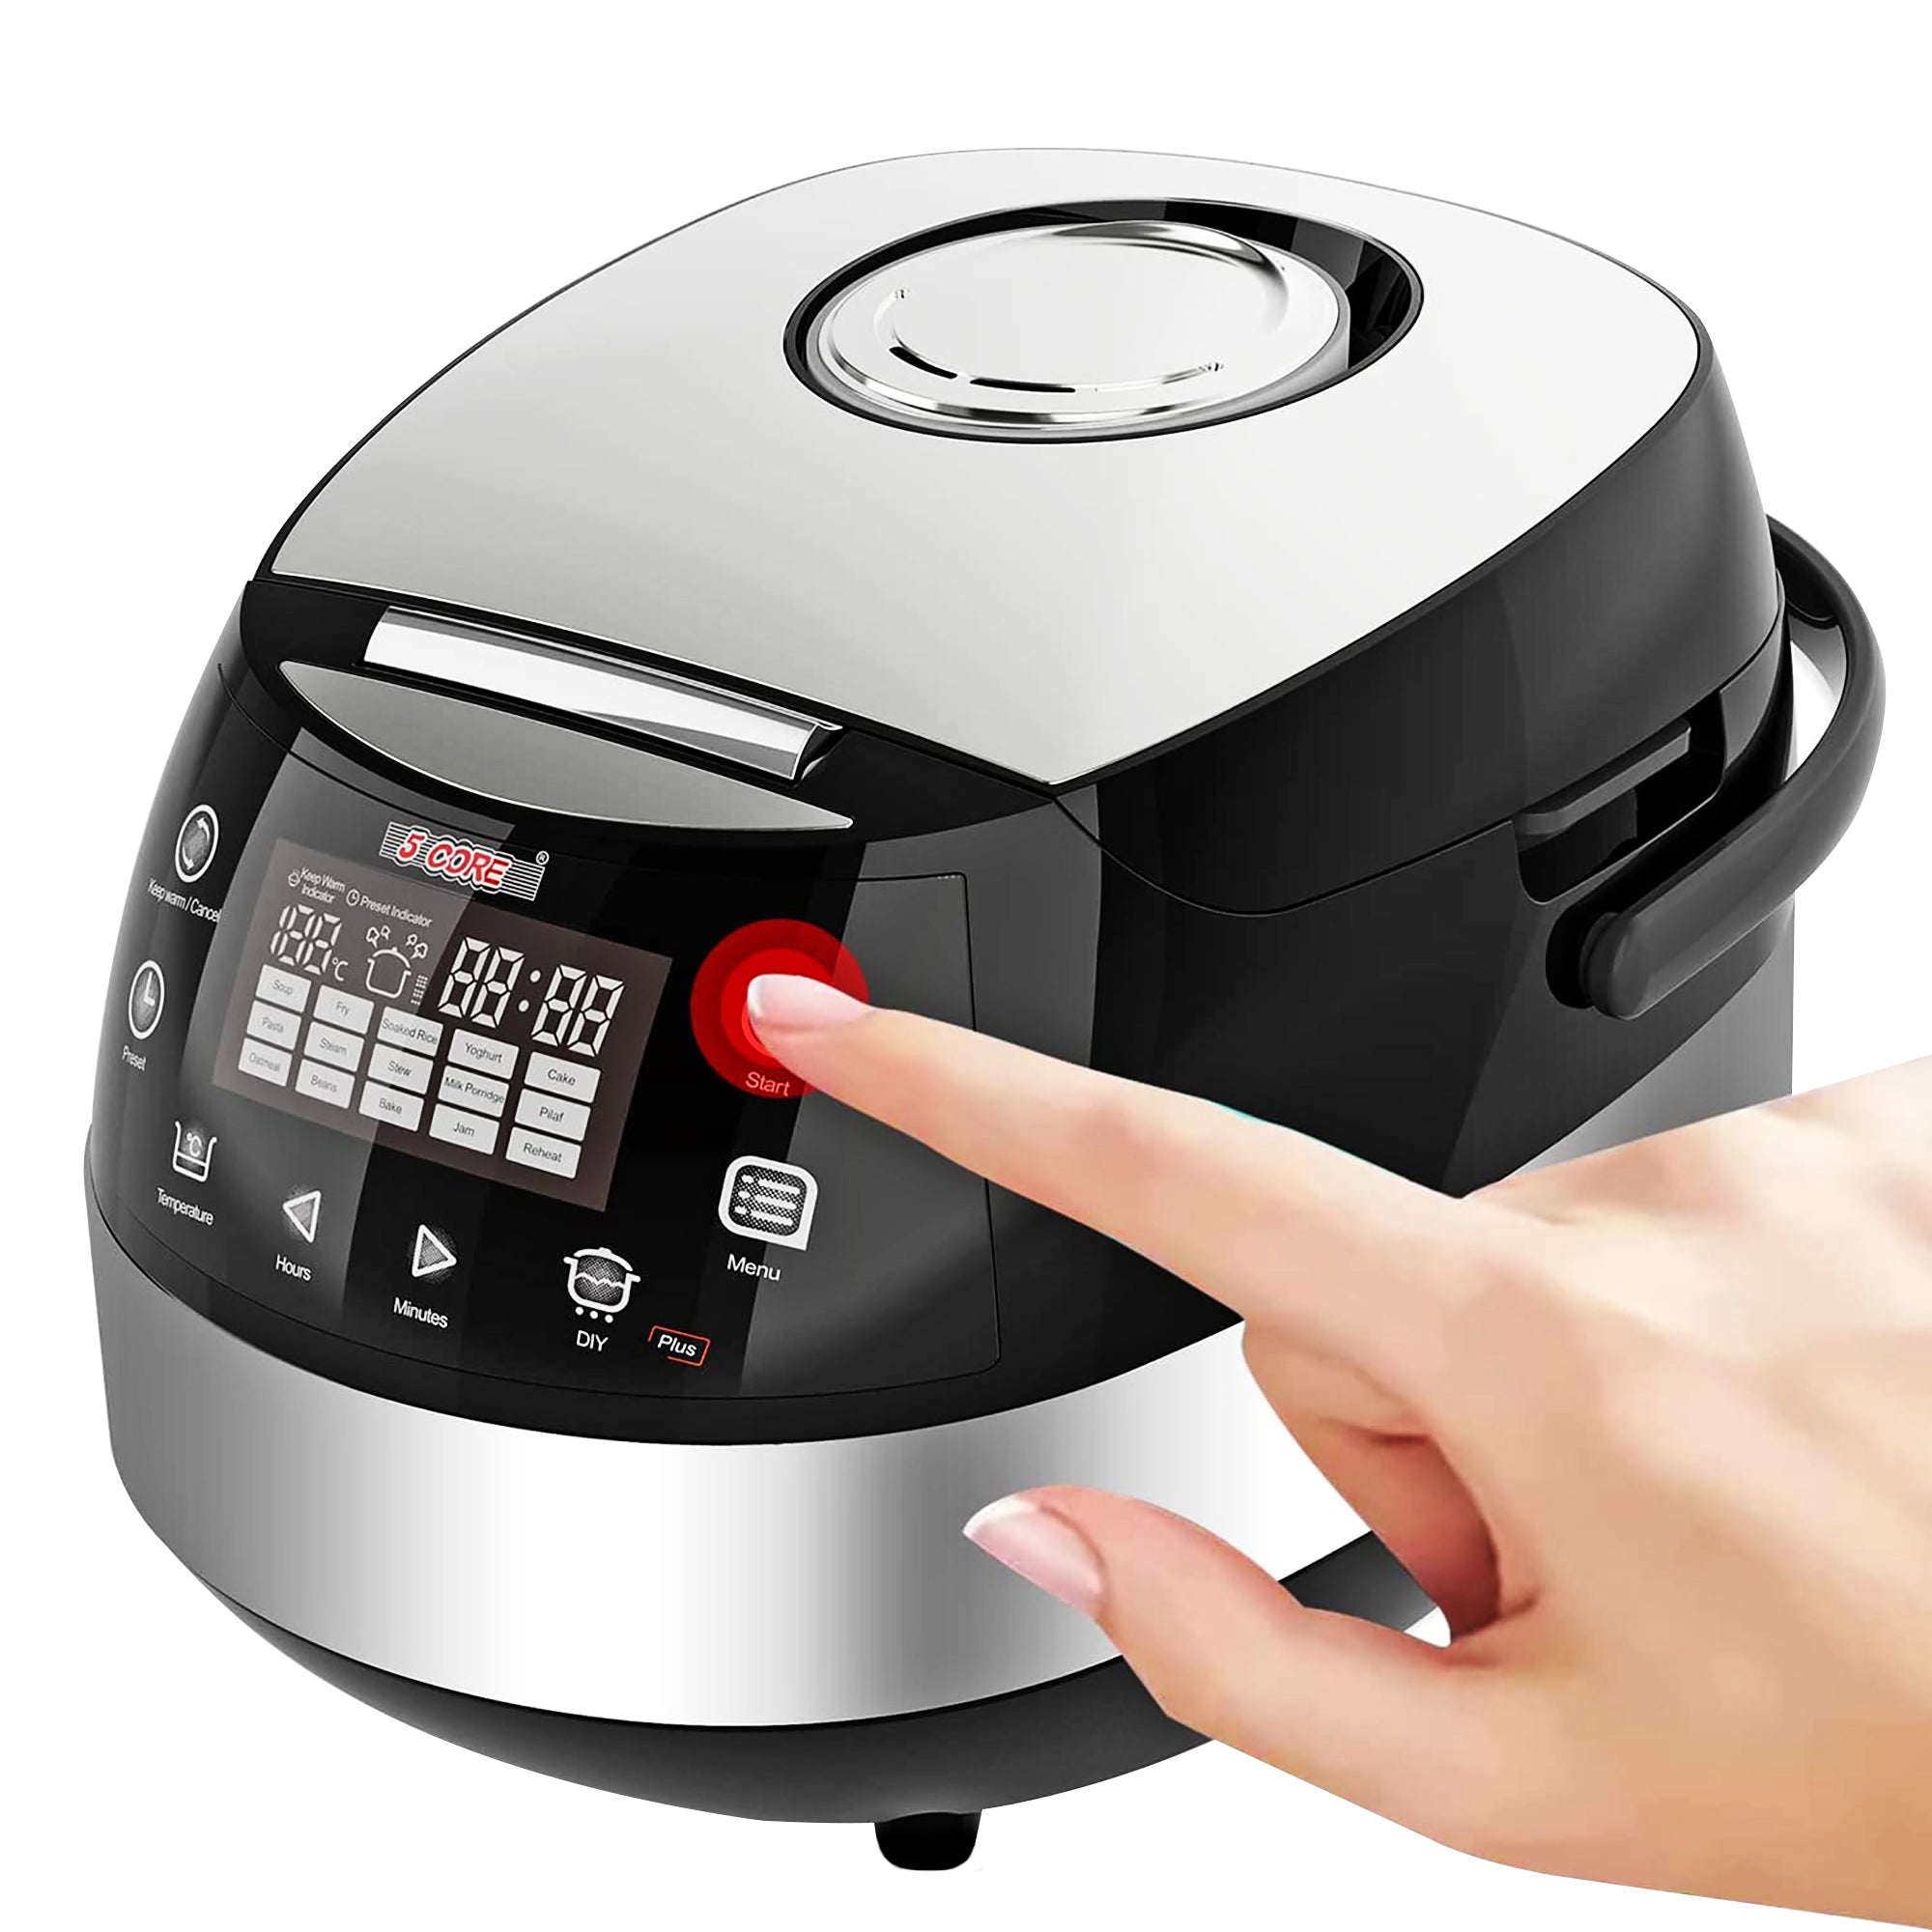 5 Core Asian Rice Cooker Black 5.3Qt Digital Programmable 15-in-1 Ergonomic Large Touch Screen Electric Multi Cooker Slow Cooker Steamer -RC 0501